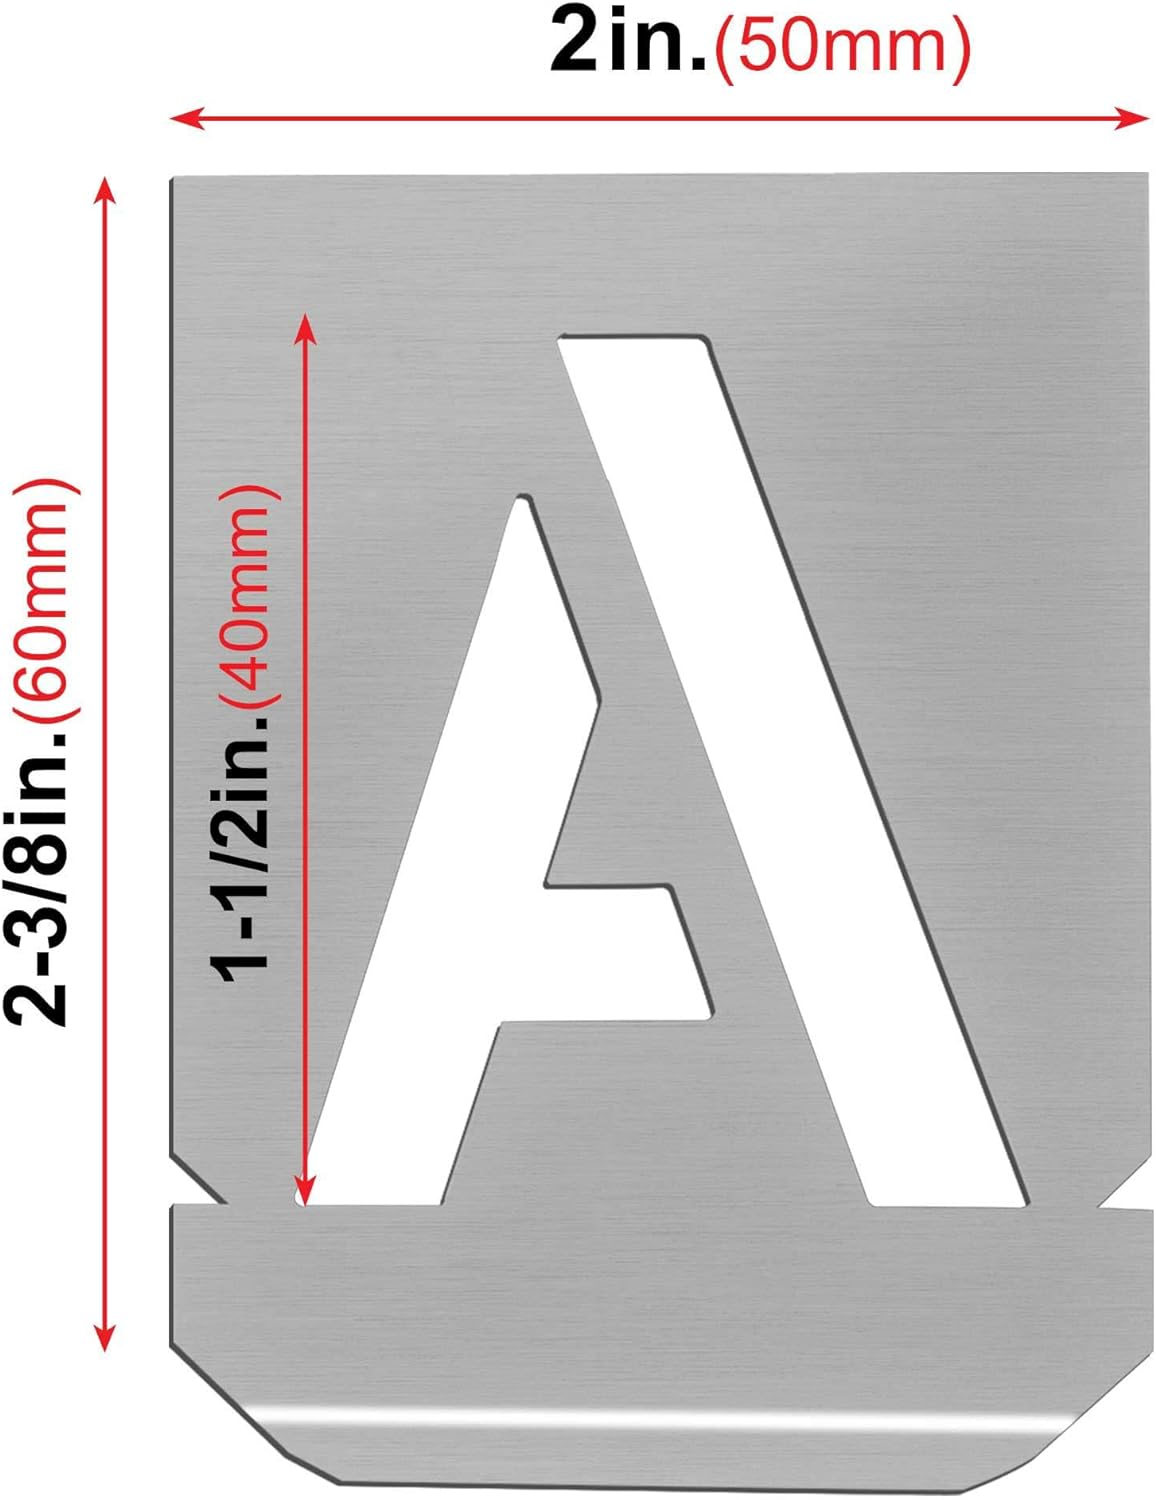 HAUTMEC Vintage Stainless Steel Letters Stencils, A to Z Stainless Steel Stencils & Holder, 40mm Letters, Shop Stencil, Advertising Stencilling, Craft-Printing, Reusable HT0239-ST